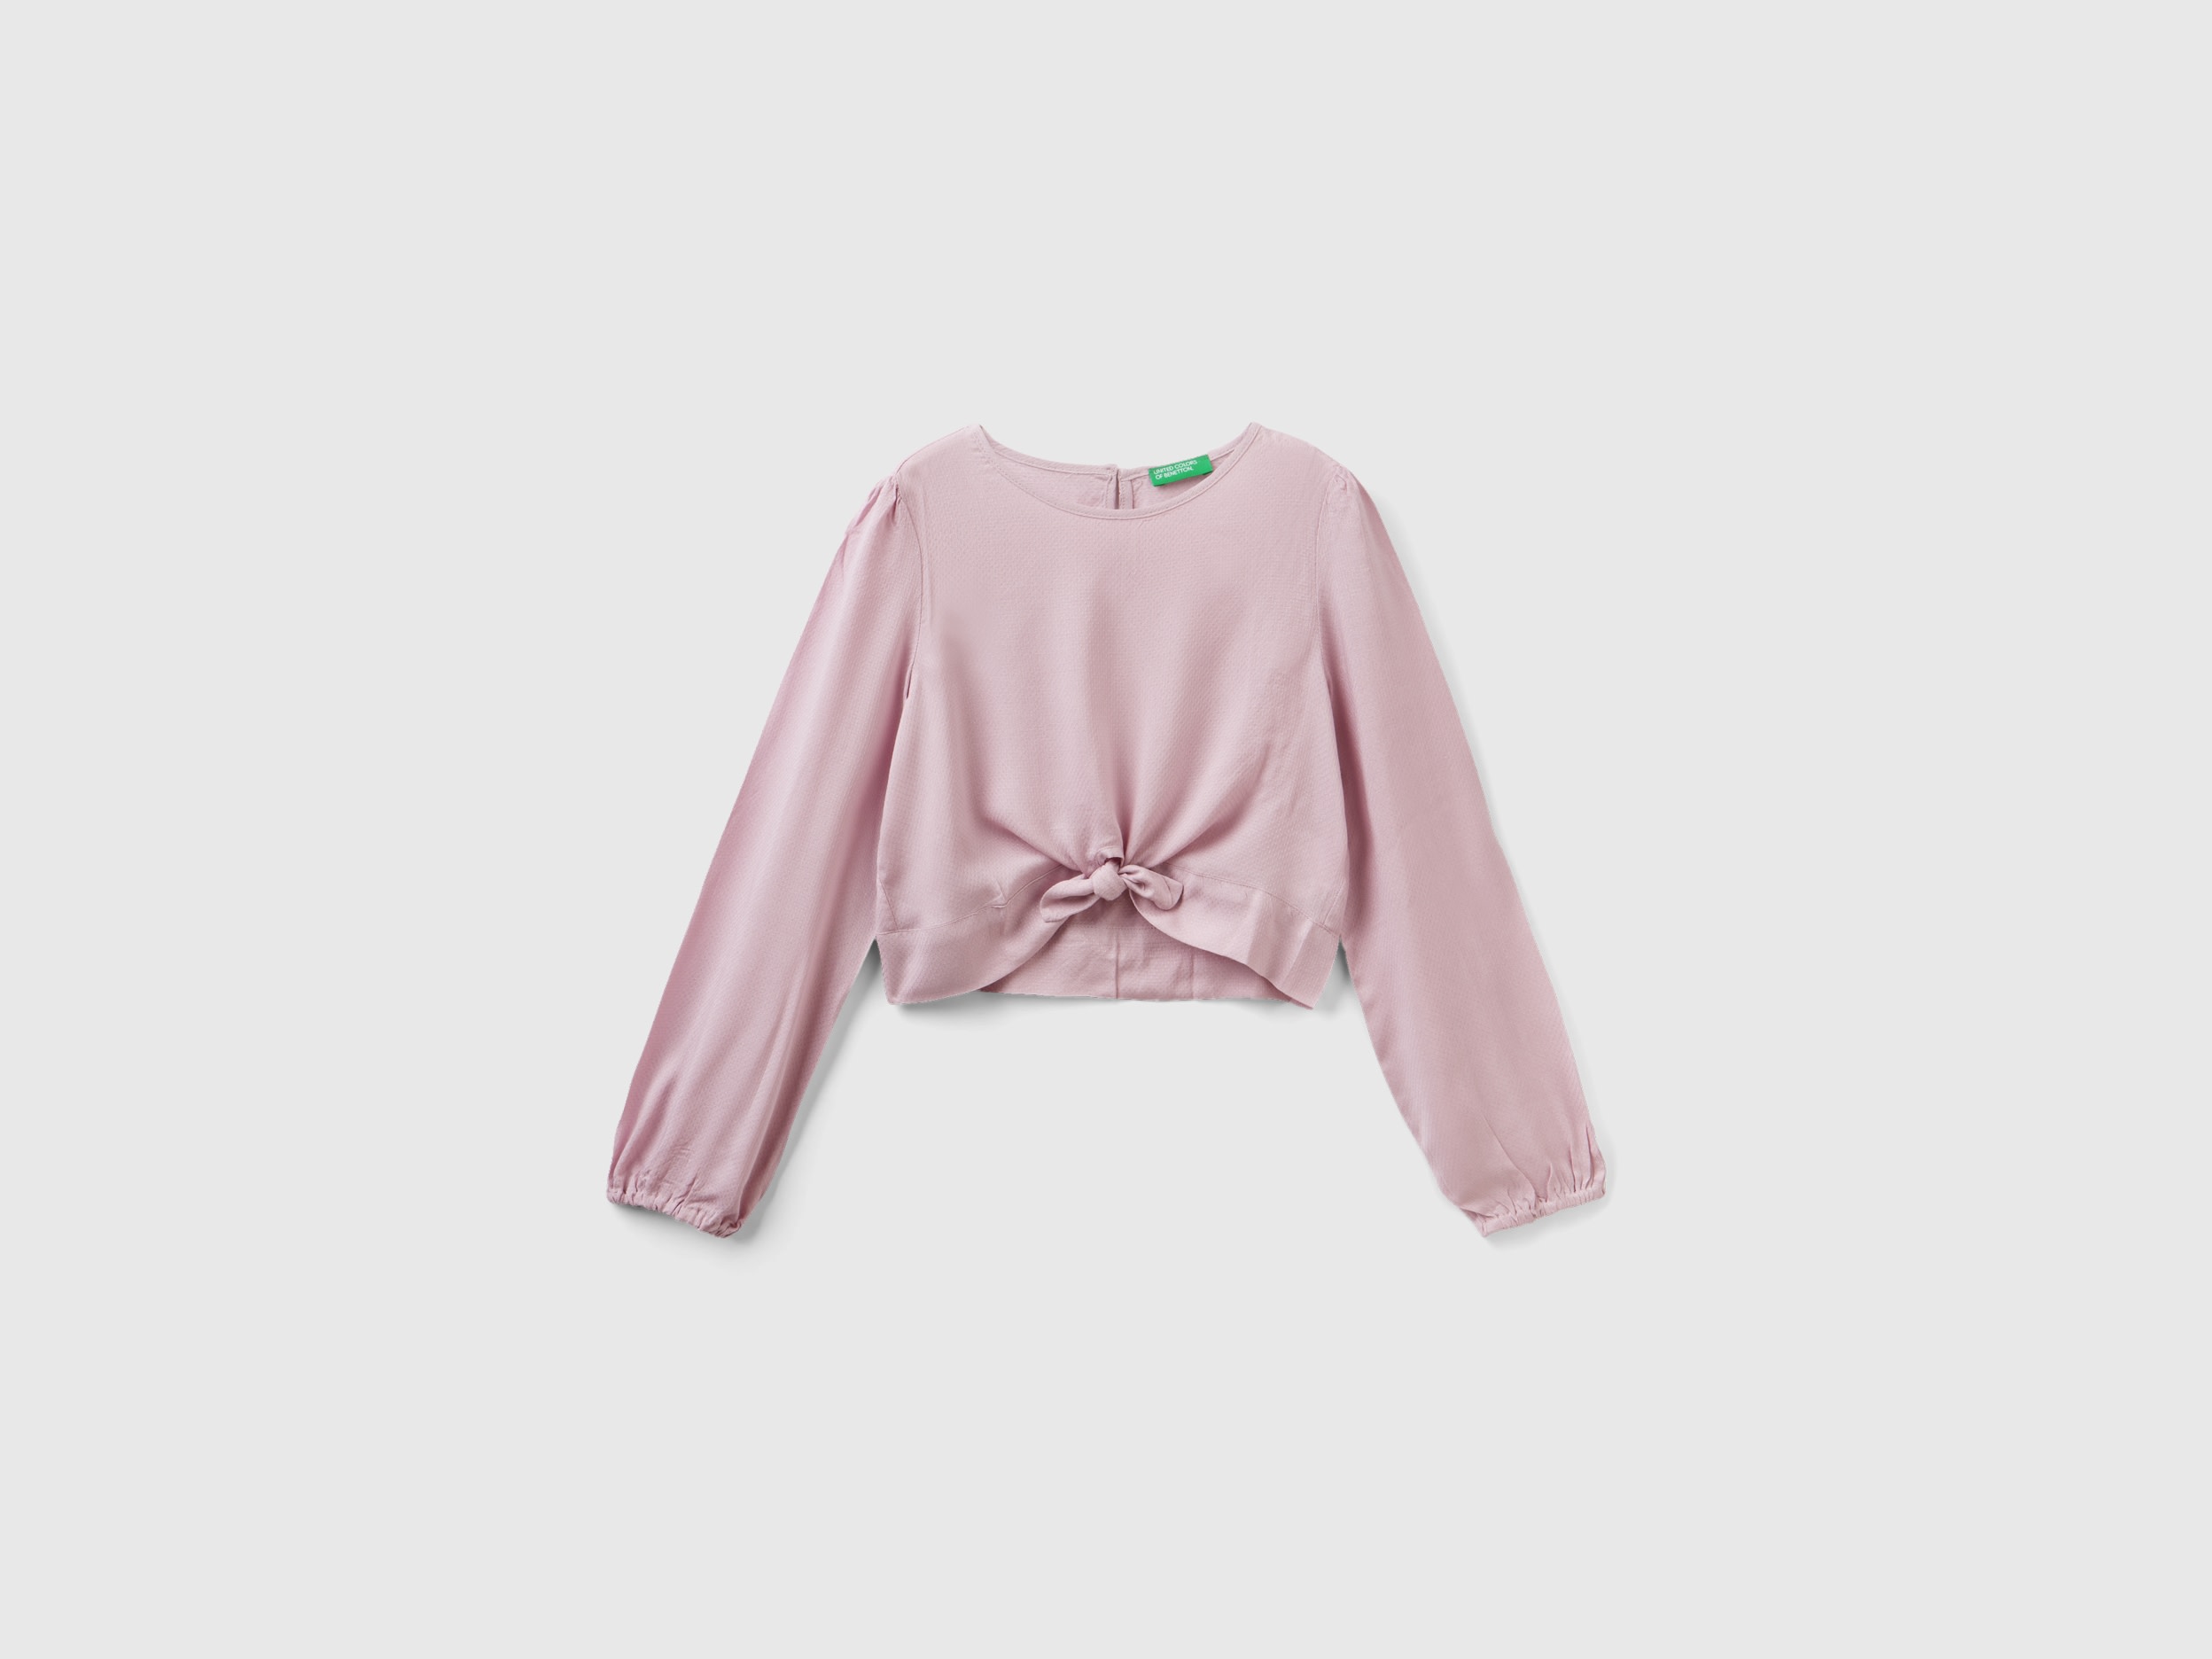 Benetton, Cropped Blouse With Knot, size L, Pink, Kids